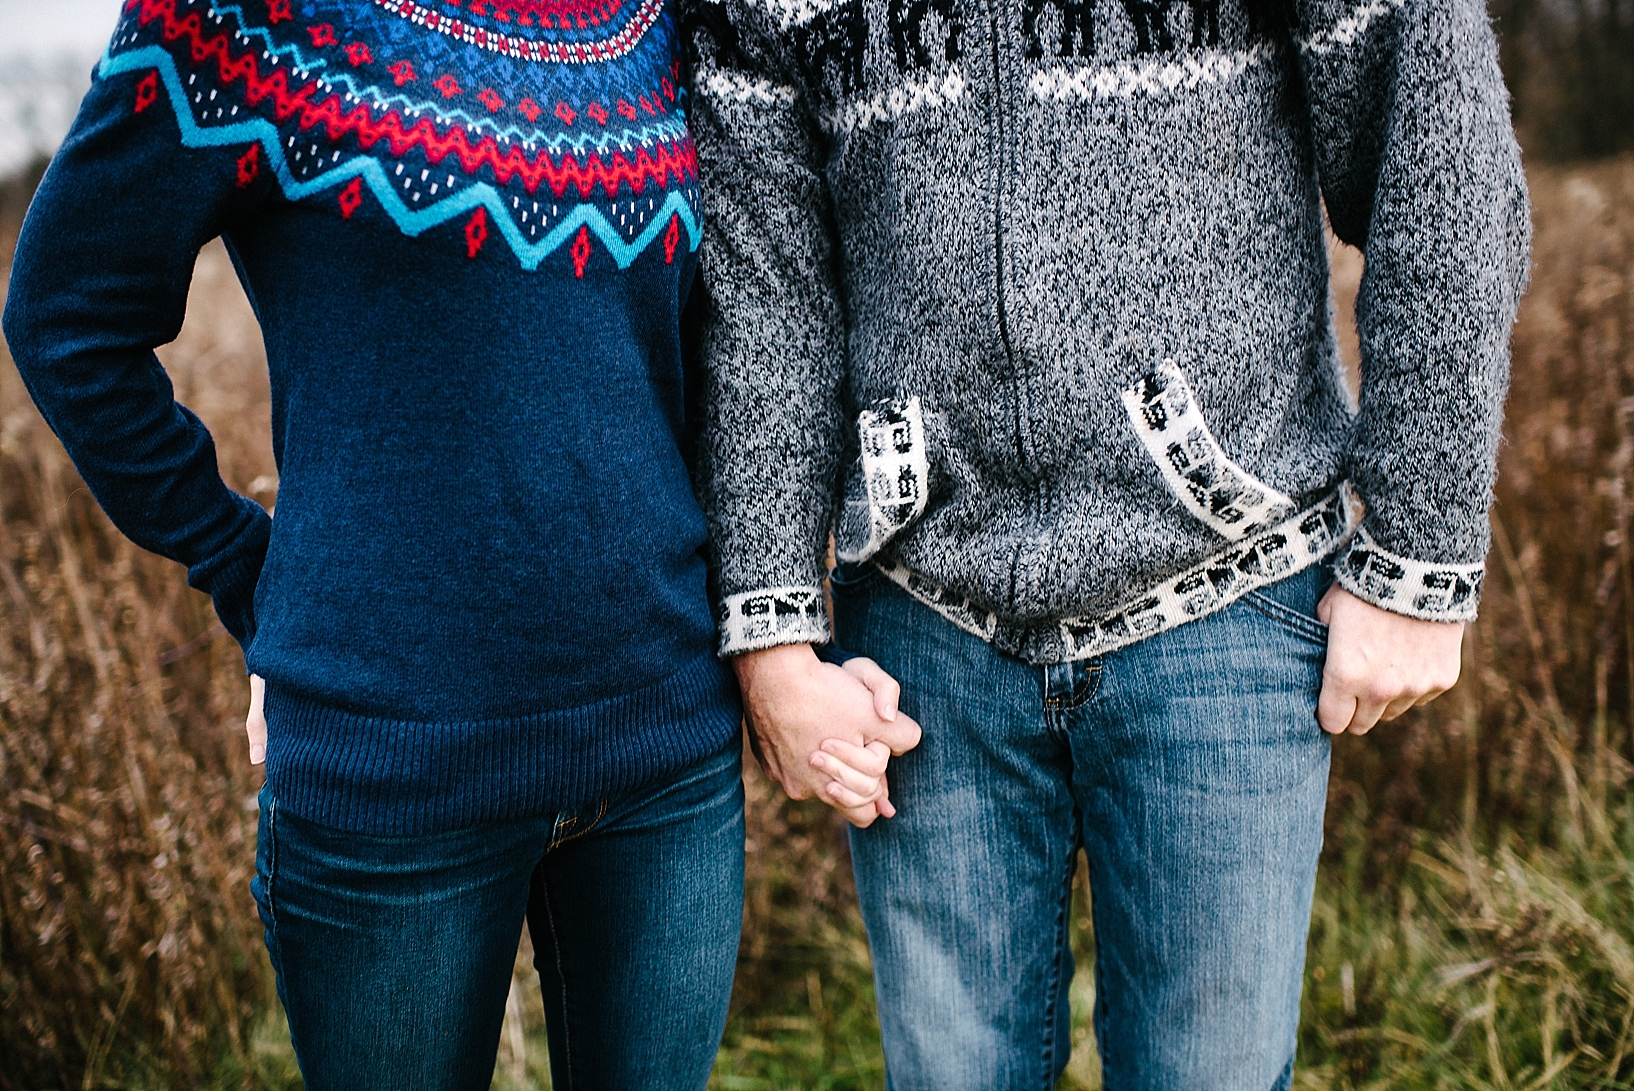 couple standing side by side holding hands wearing patterned winter sweaters